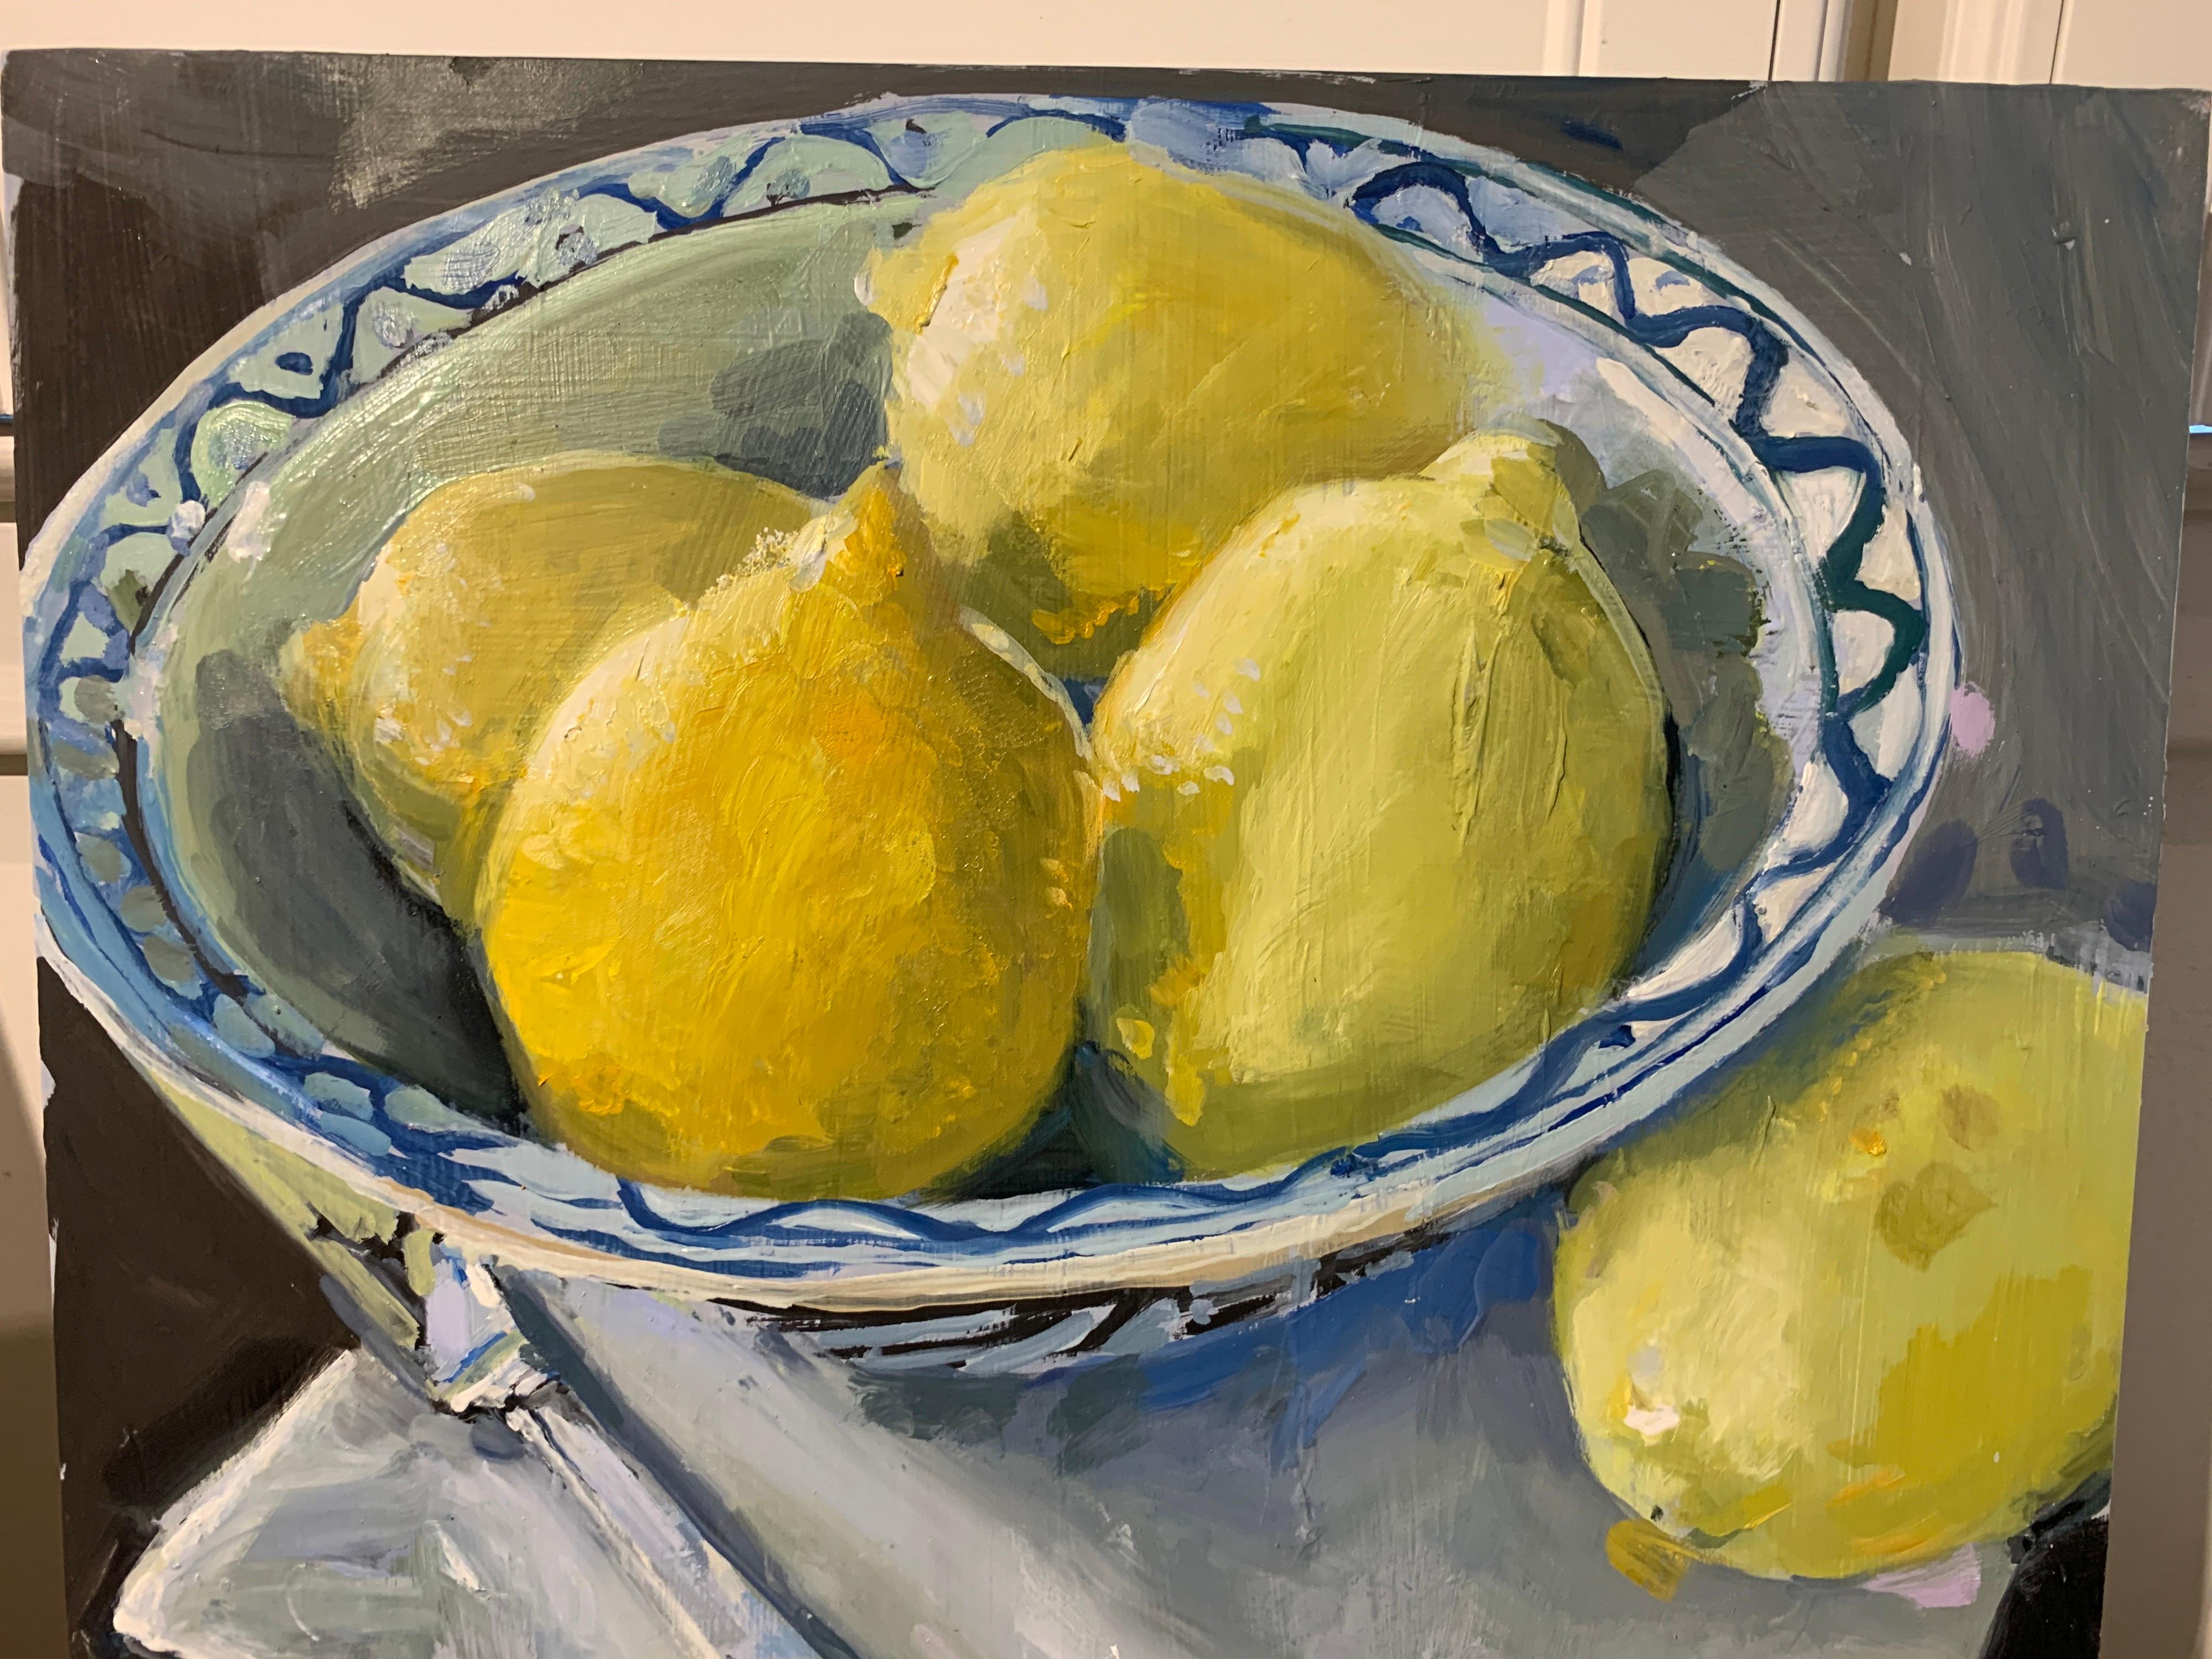 Lemons in a Blue and White Bowl by Laura Shubert, Petite Oil on Board Still Life - Gray Figurative Painting by Laura Lacambra Shubert